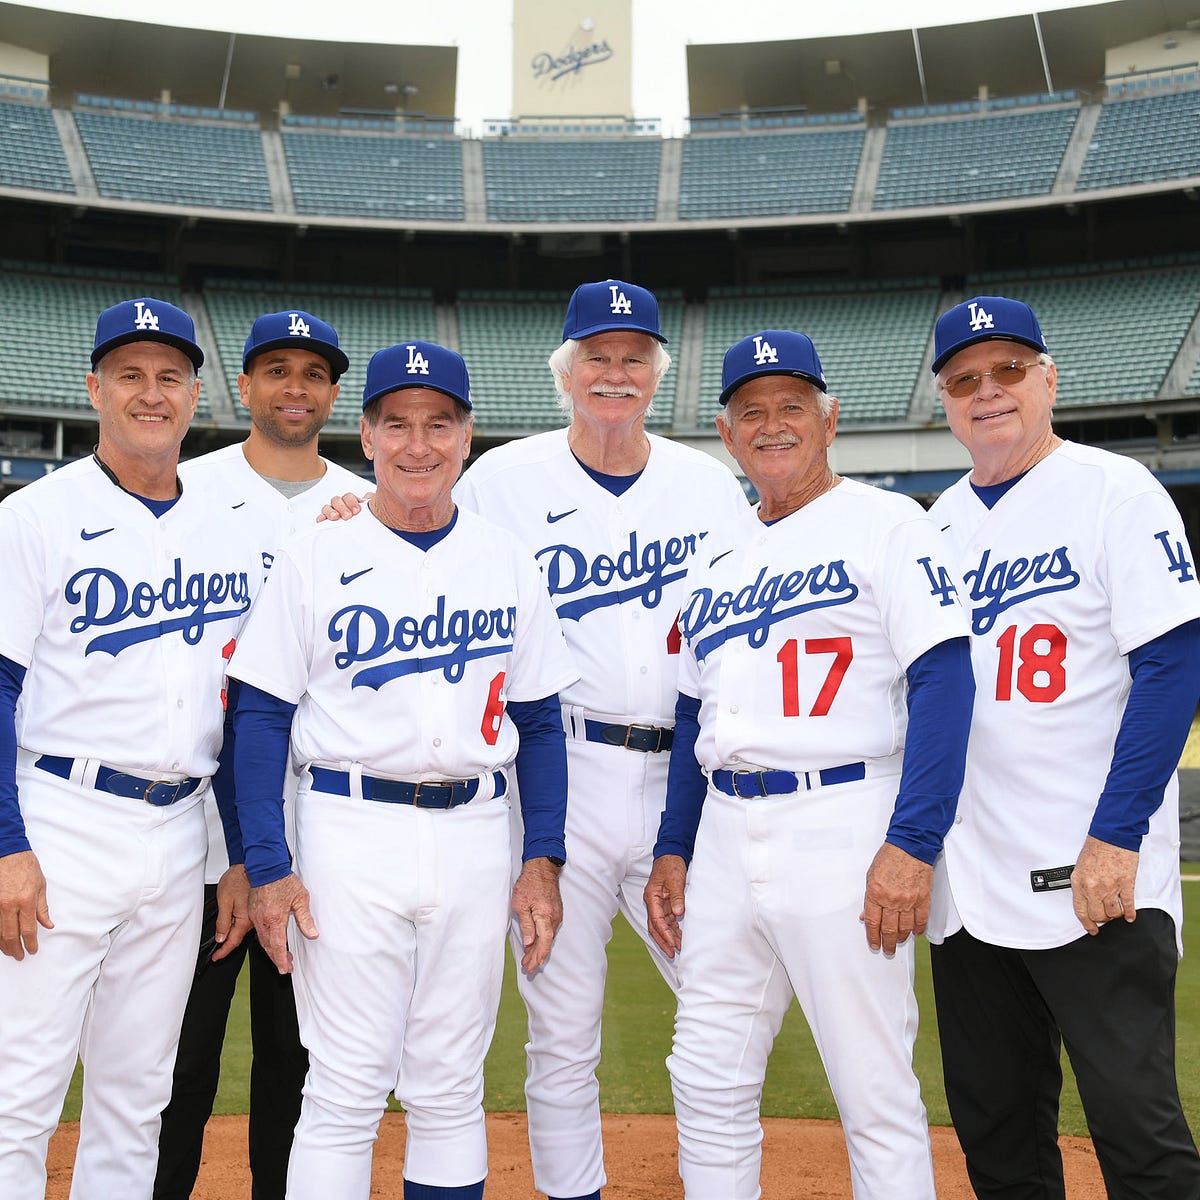 A Dodger fantasy: 72 people lived out their dreams at Dodger